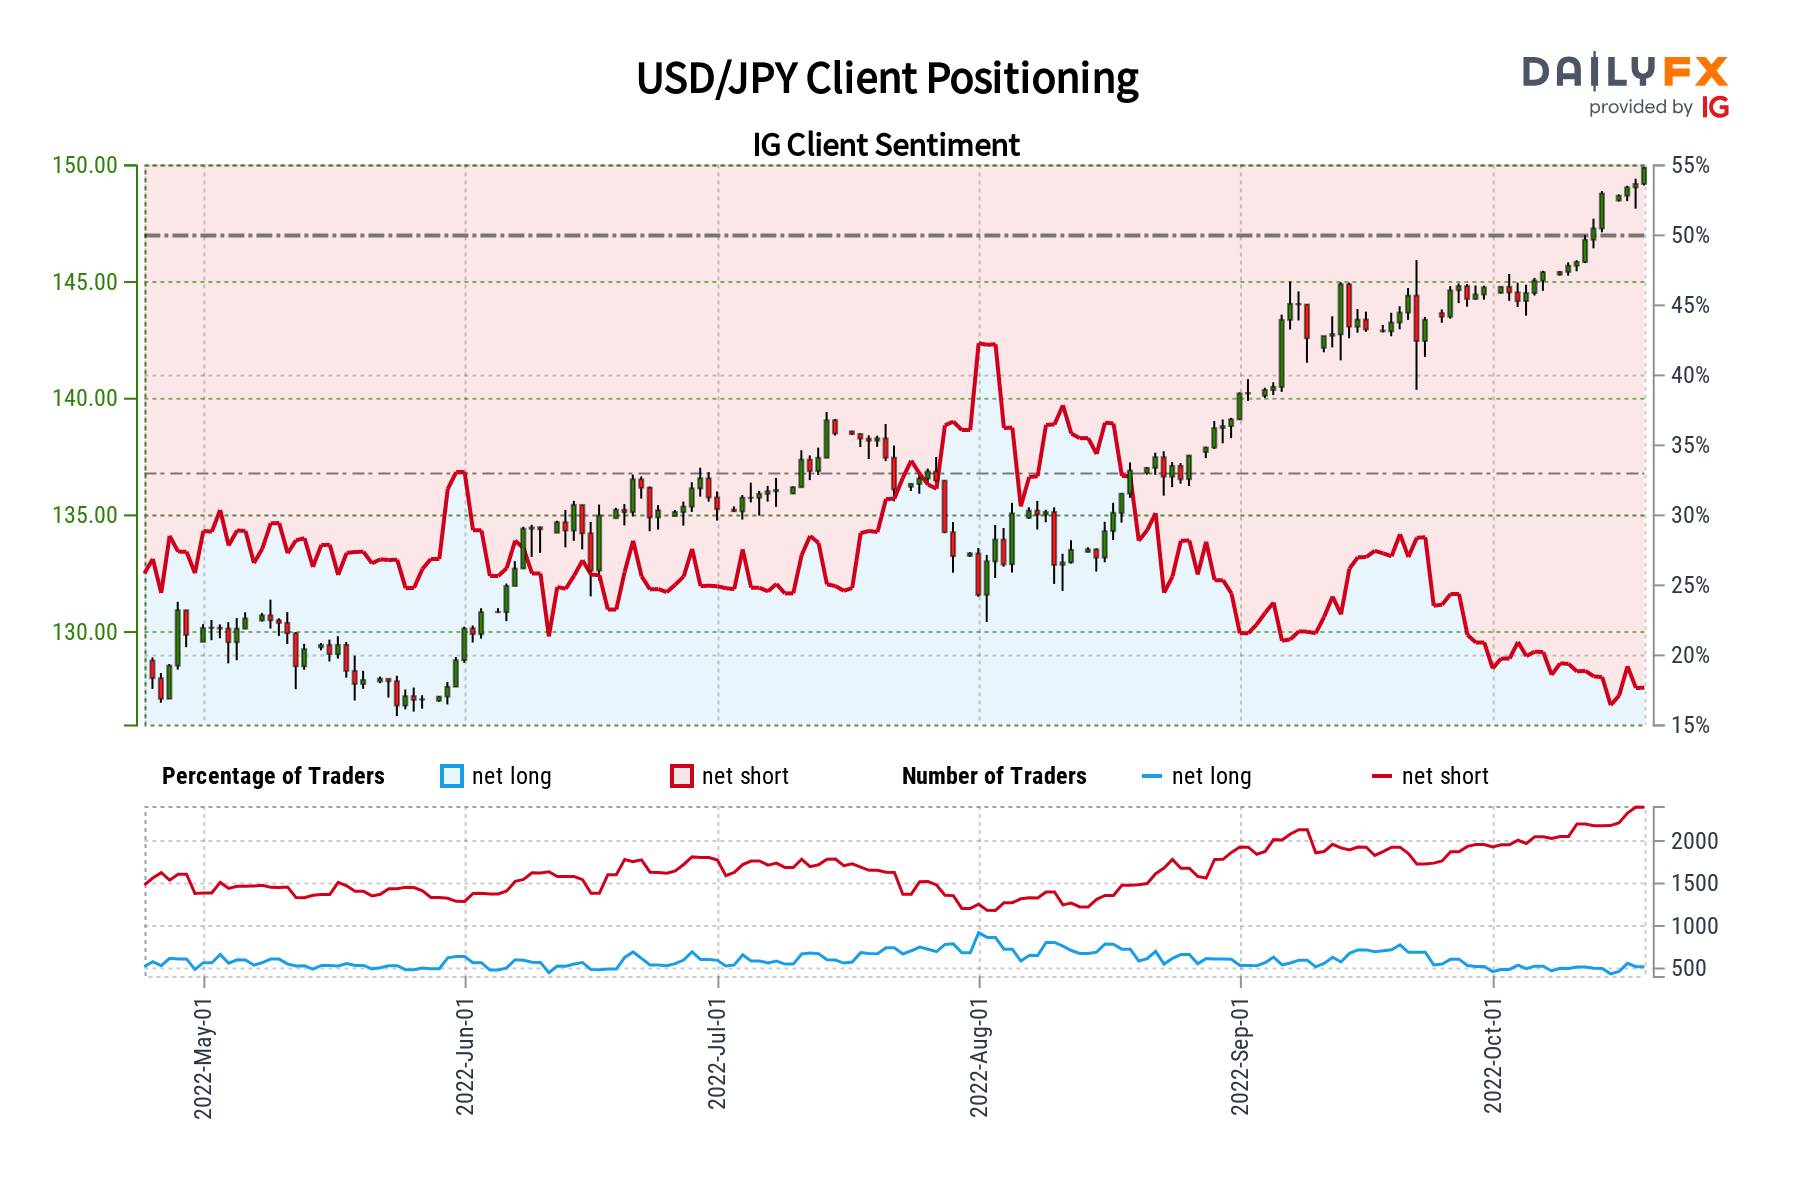 USD/JPY Sentiment Outlook - Mixed